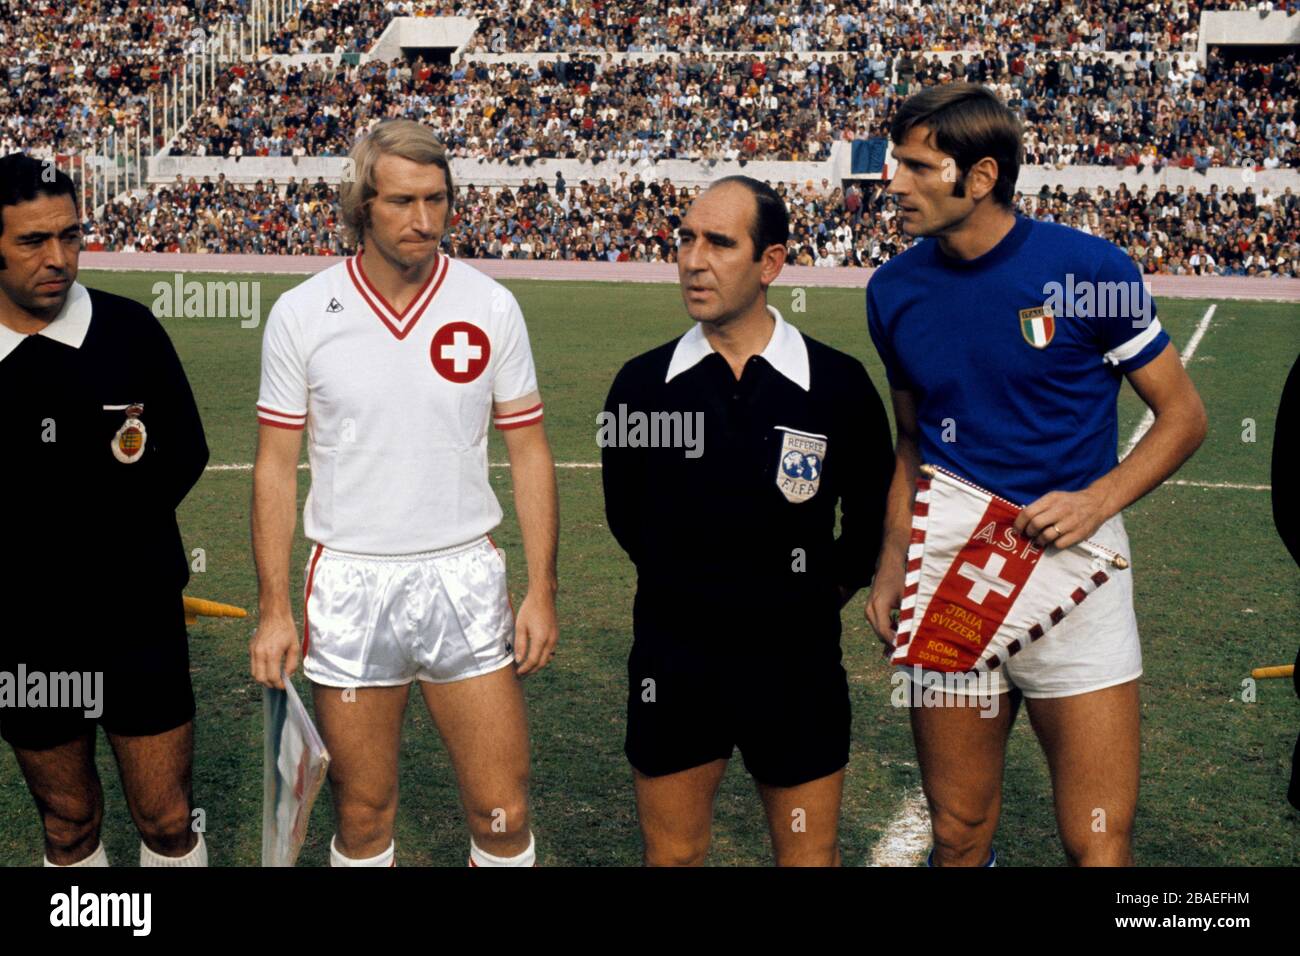 The captains of Switzerland, Karl Odermatt (white shirt), and Italy, Giacinto Facchetti (blue shirt), greet each other before their match in Rome Stock Photo